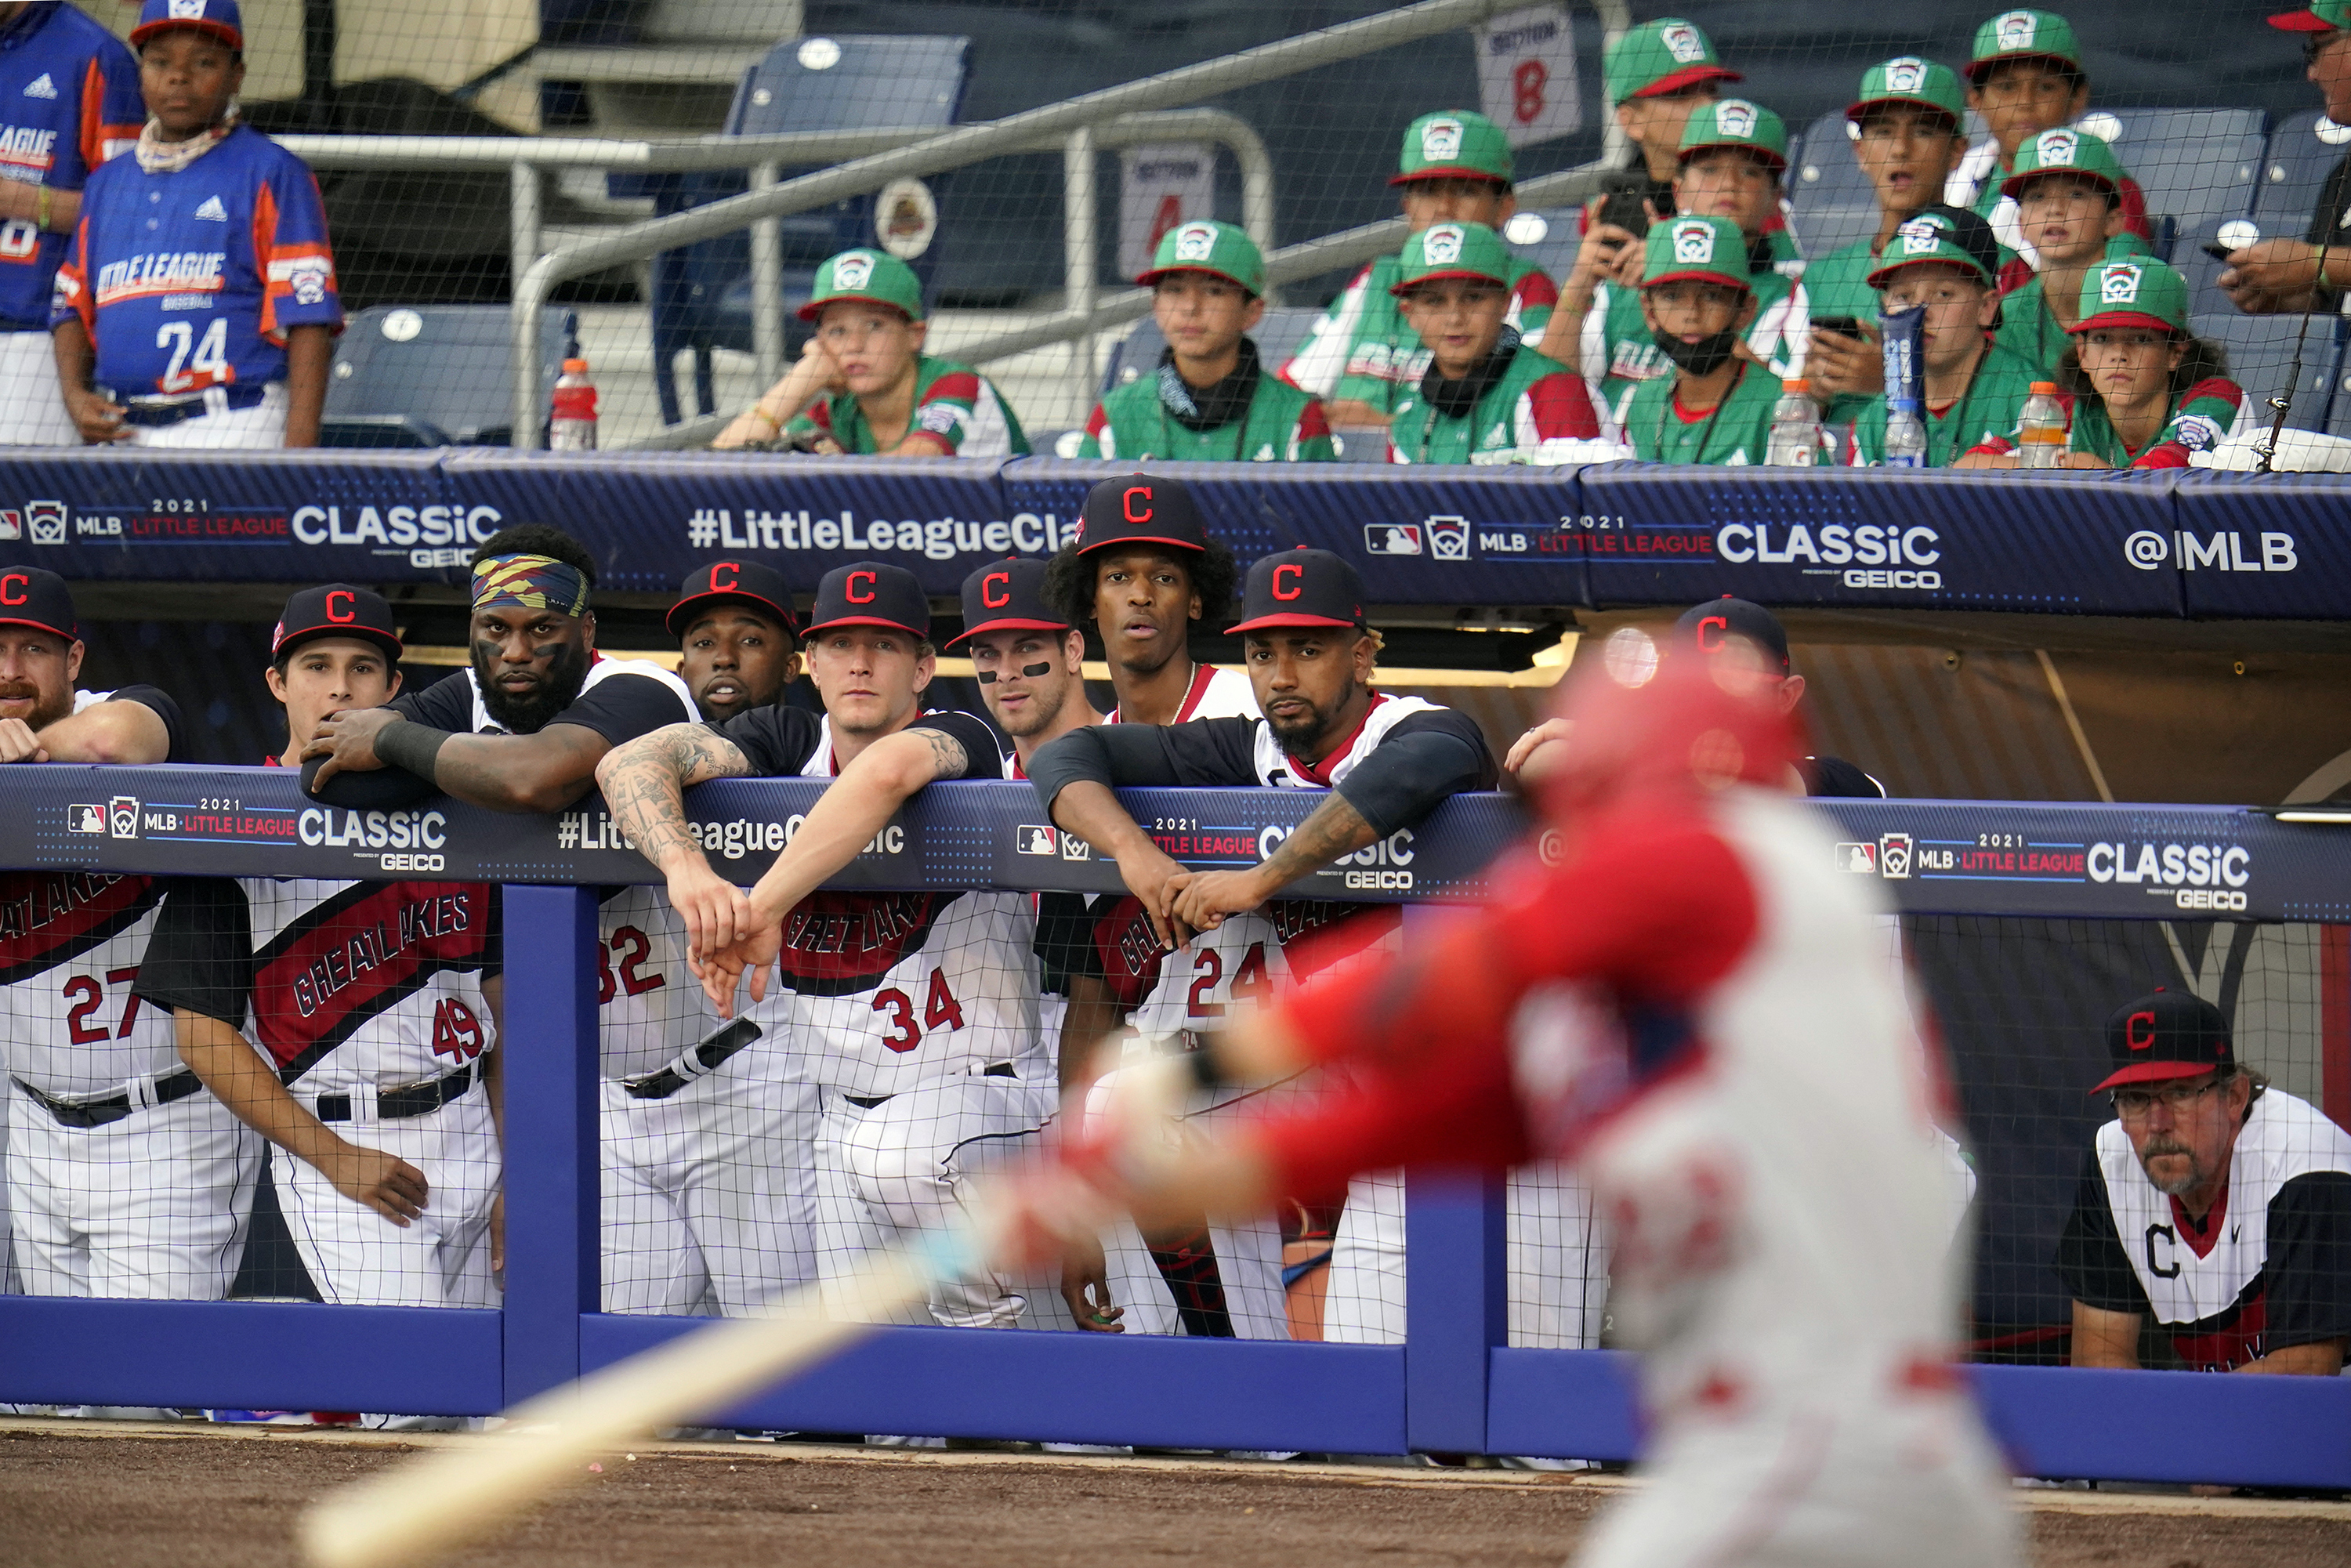 Red Sox, Orioles to play in 2020 MLB Little League Classic in Williamsport, Sports